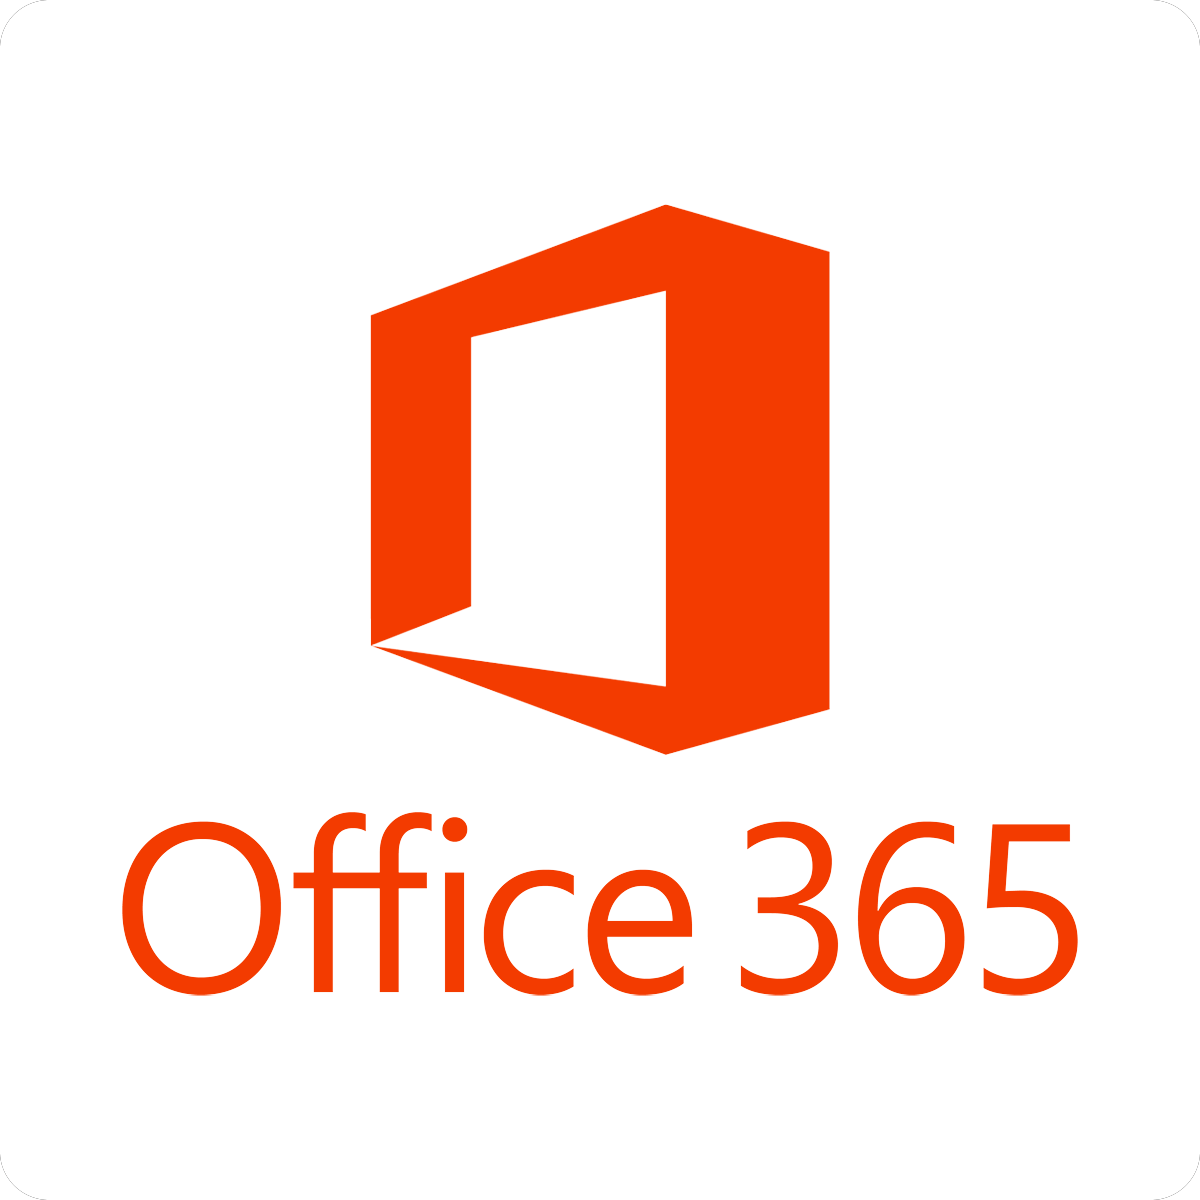 Microsoft Office 365 Professional Plus For 5 Devices, Lifetime PC / MAC No Subscription